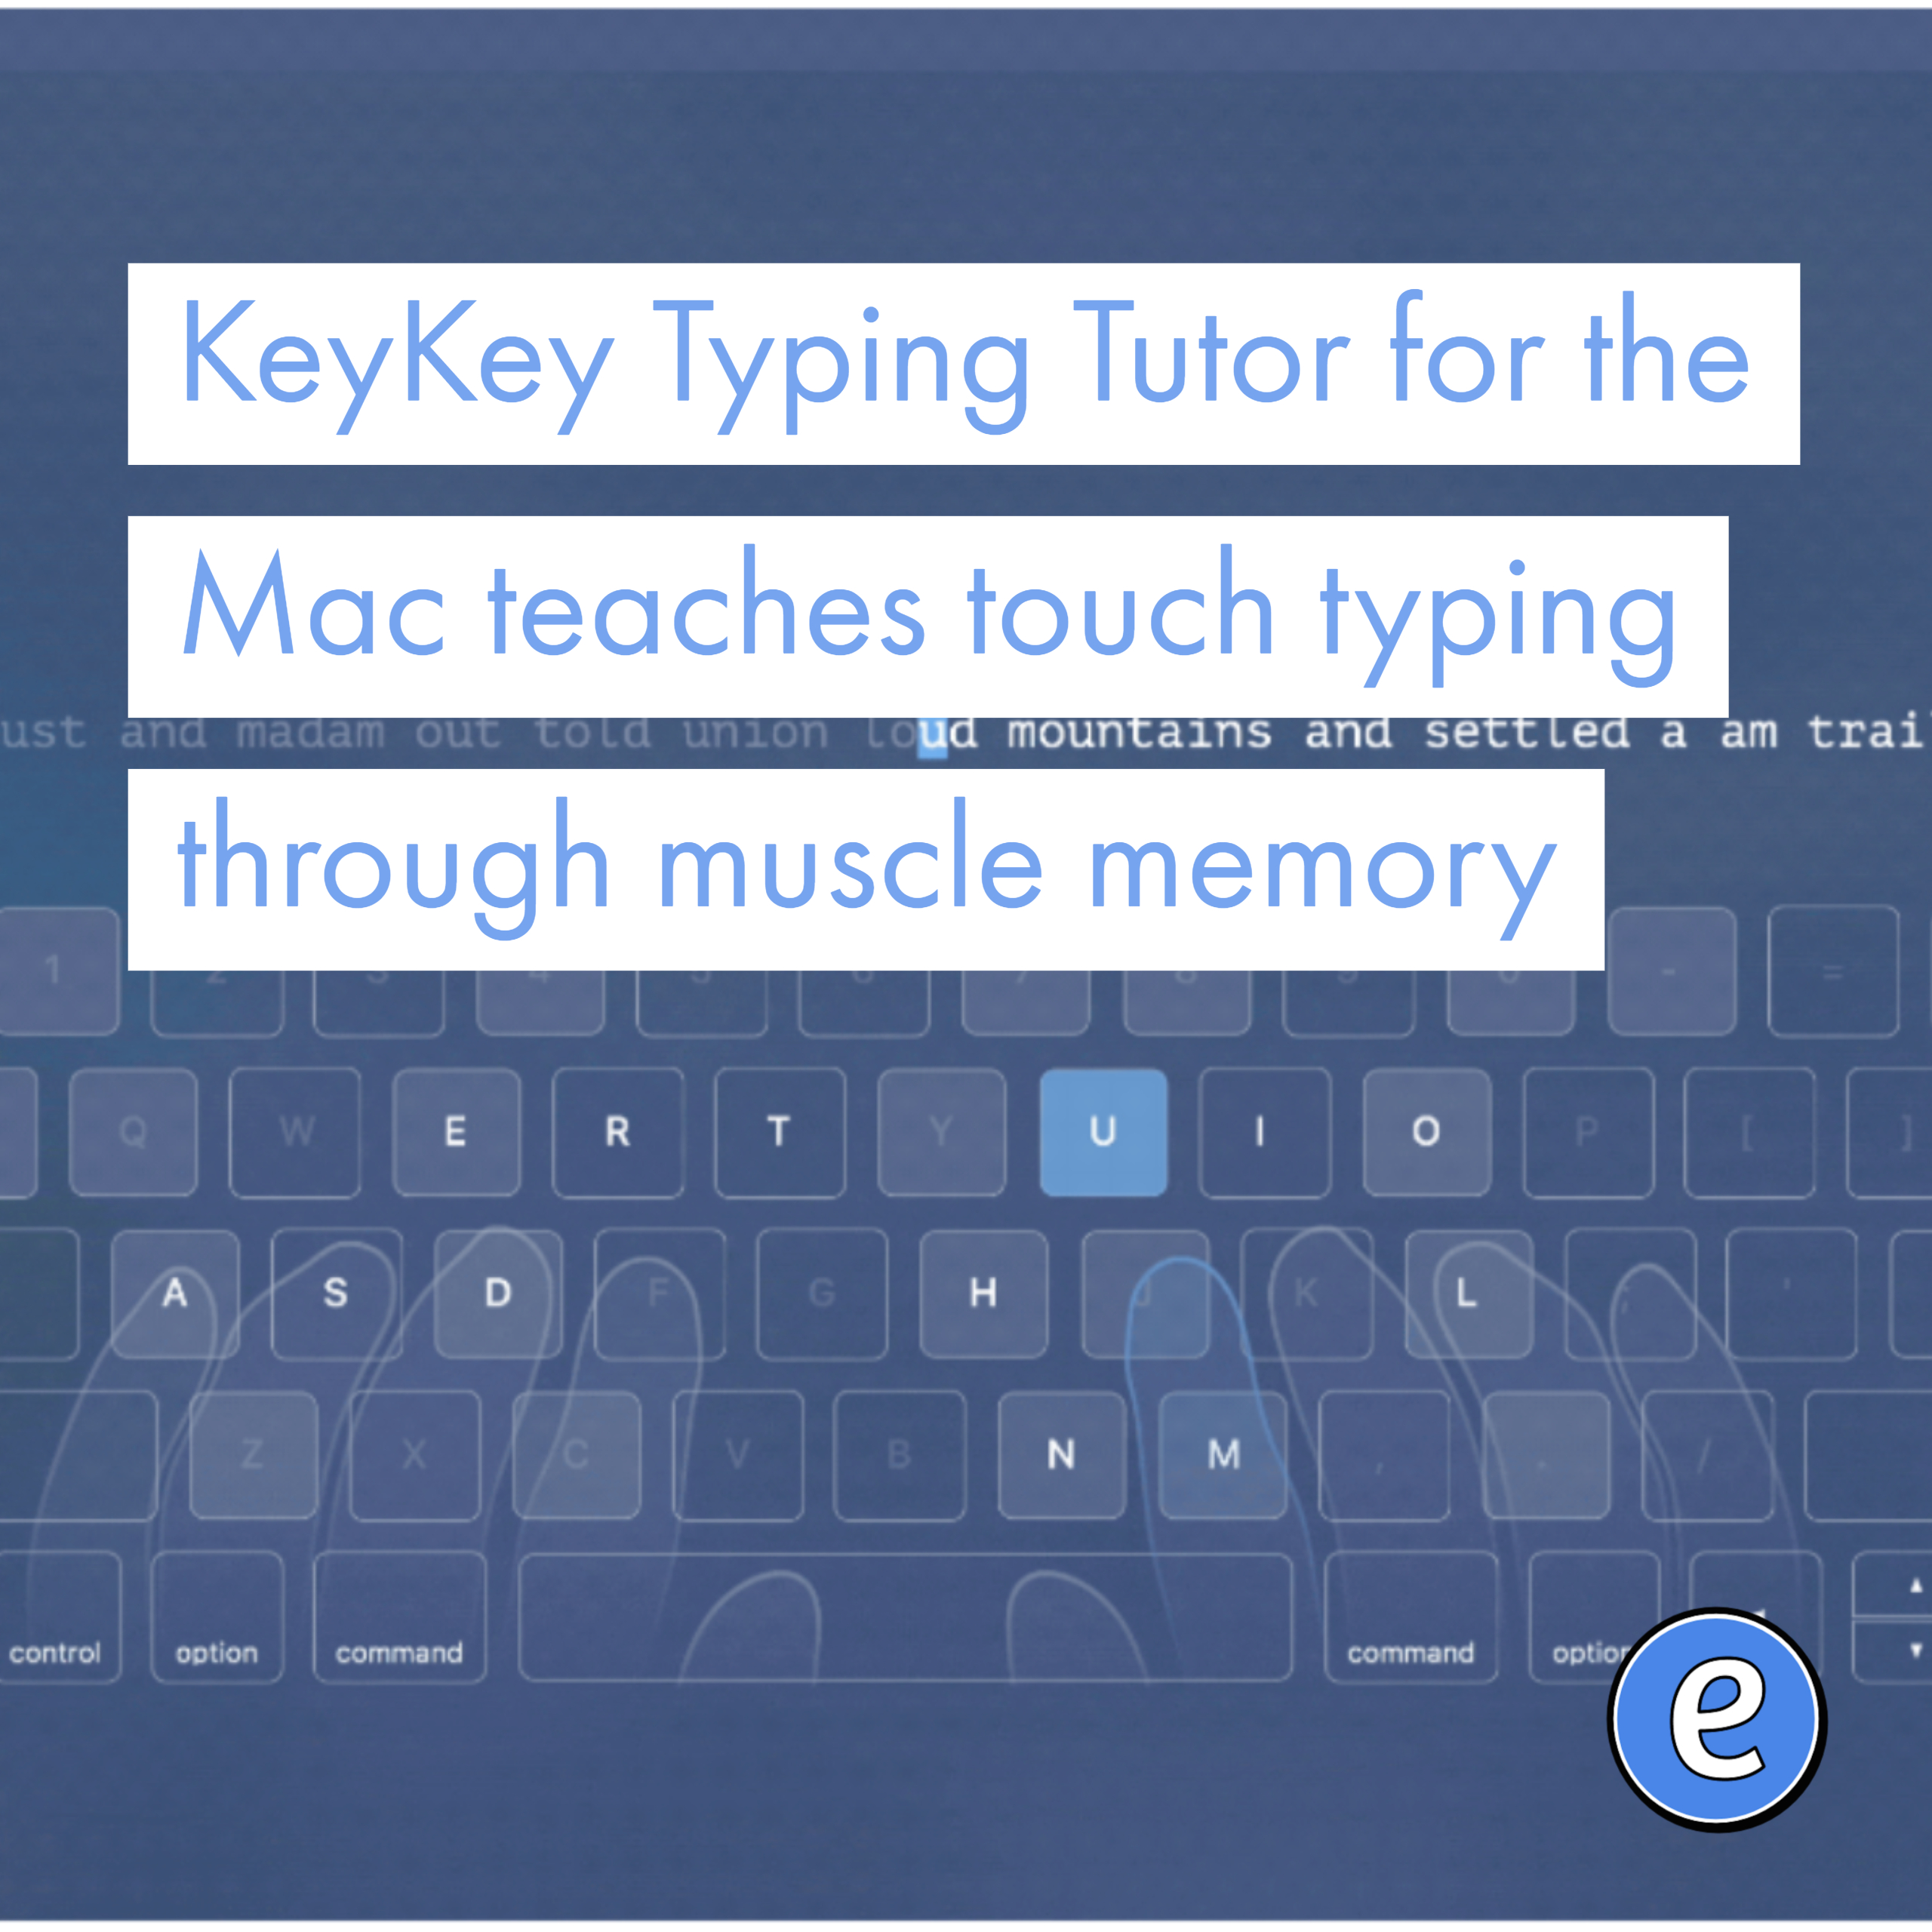 KeyKey Typing Tutor for the Mac teaches touch typing through muscle memory